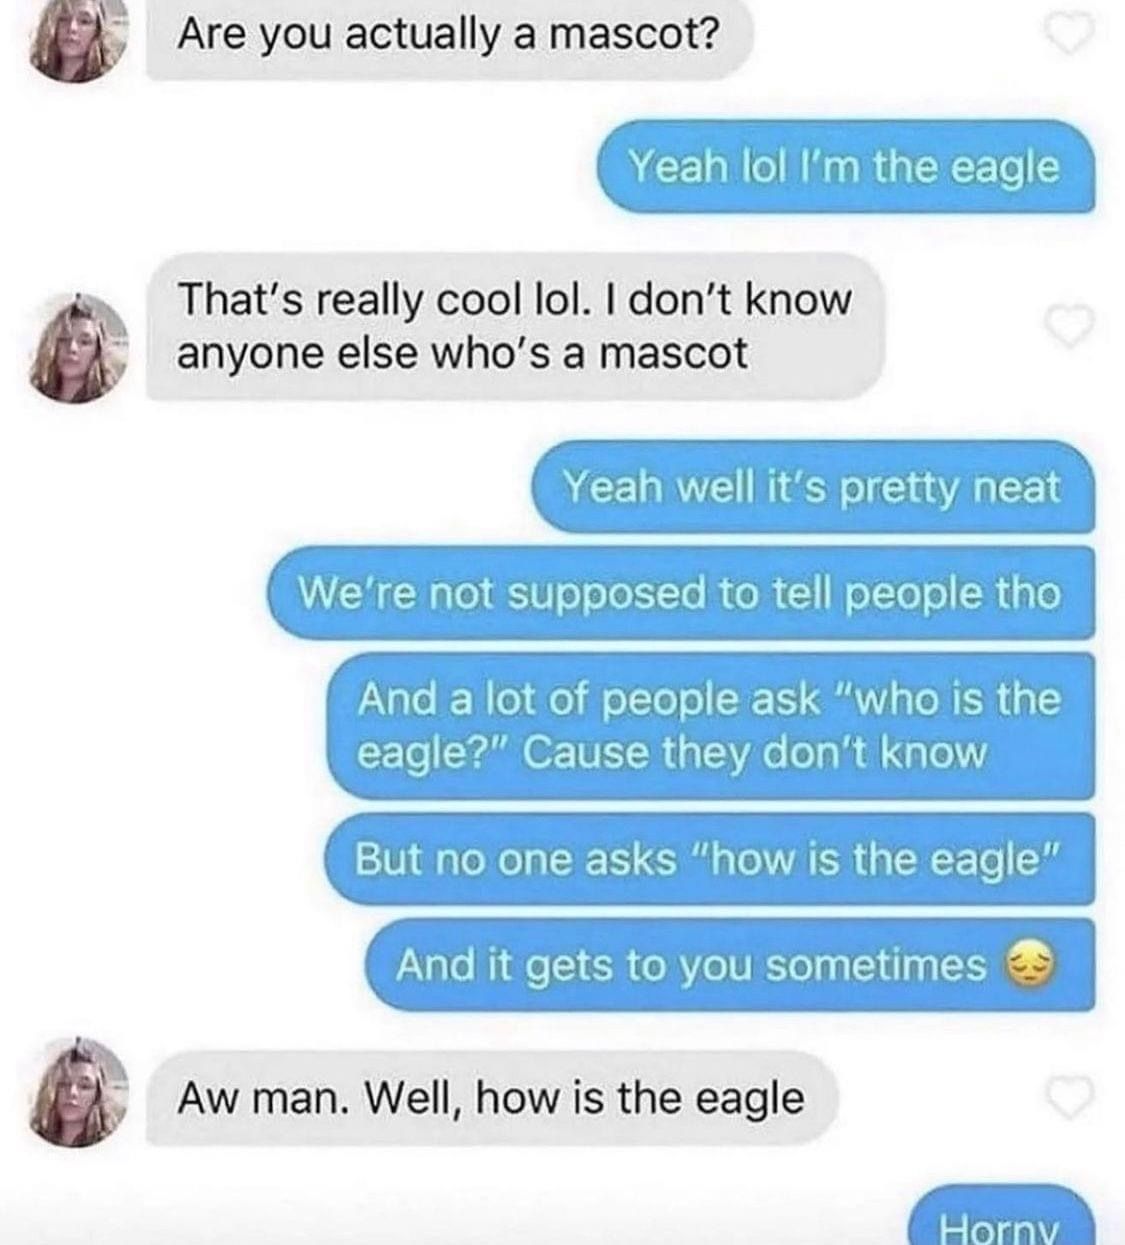 How is the eagle?